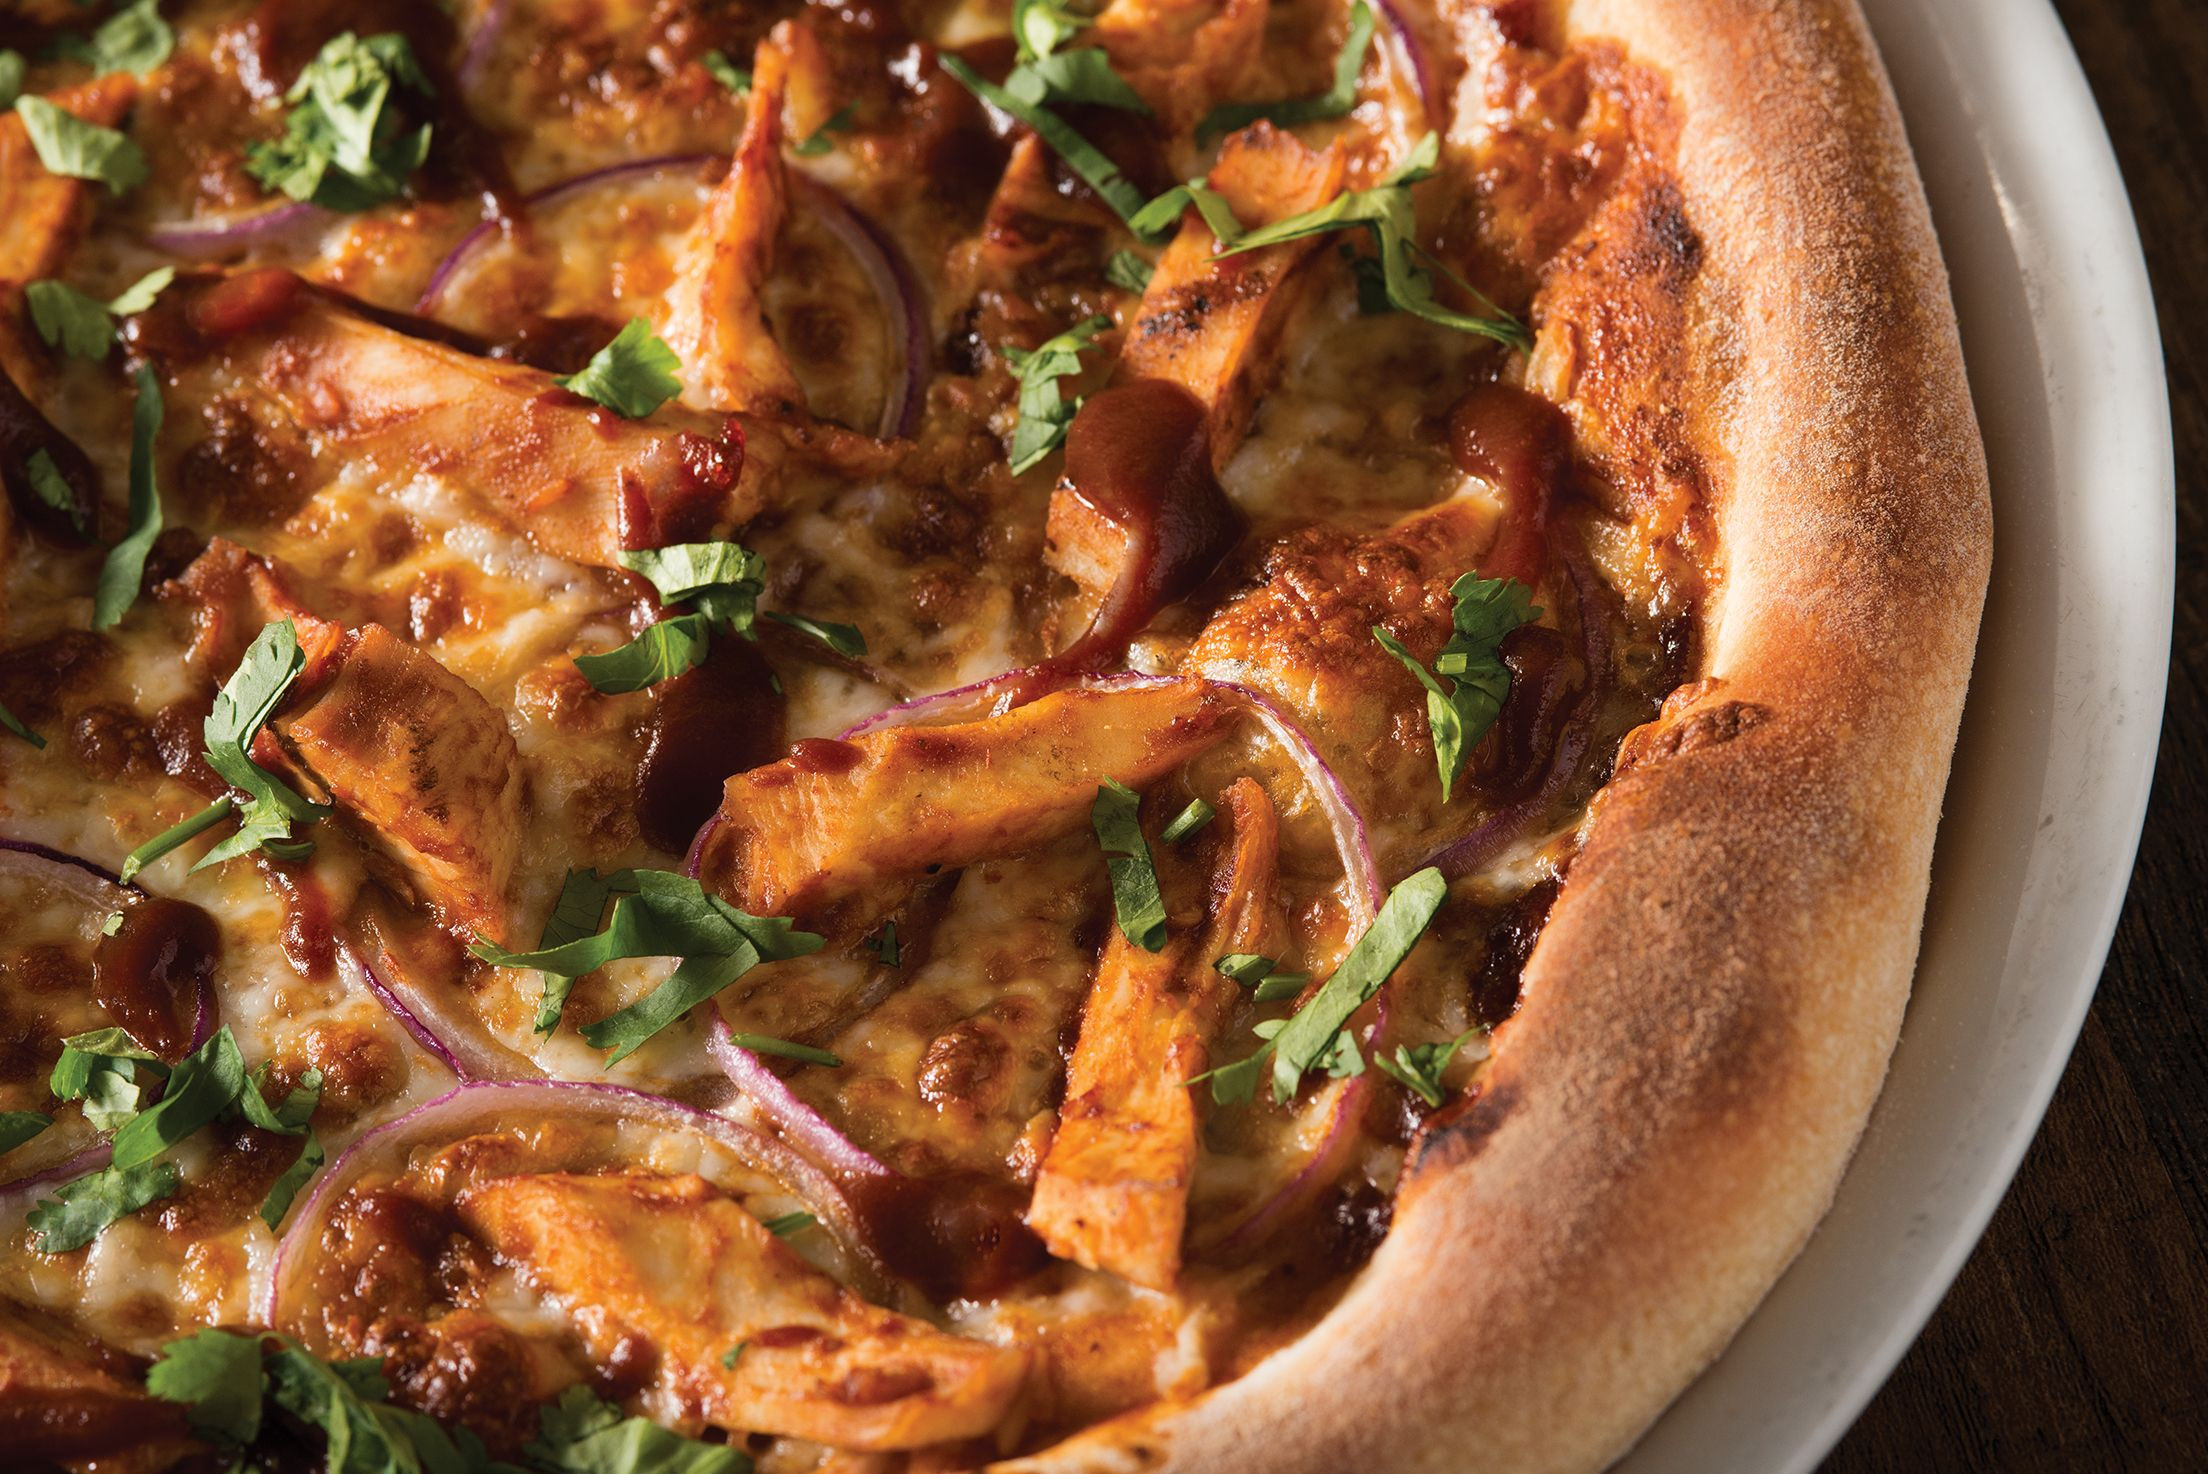 California Pizza Kitchen the original Hand-tossed Bbq Chicken Pizza Unique California Pizza Kitchen Menu Items Catering and